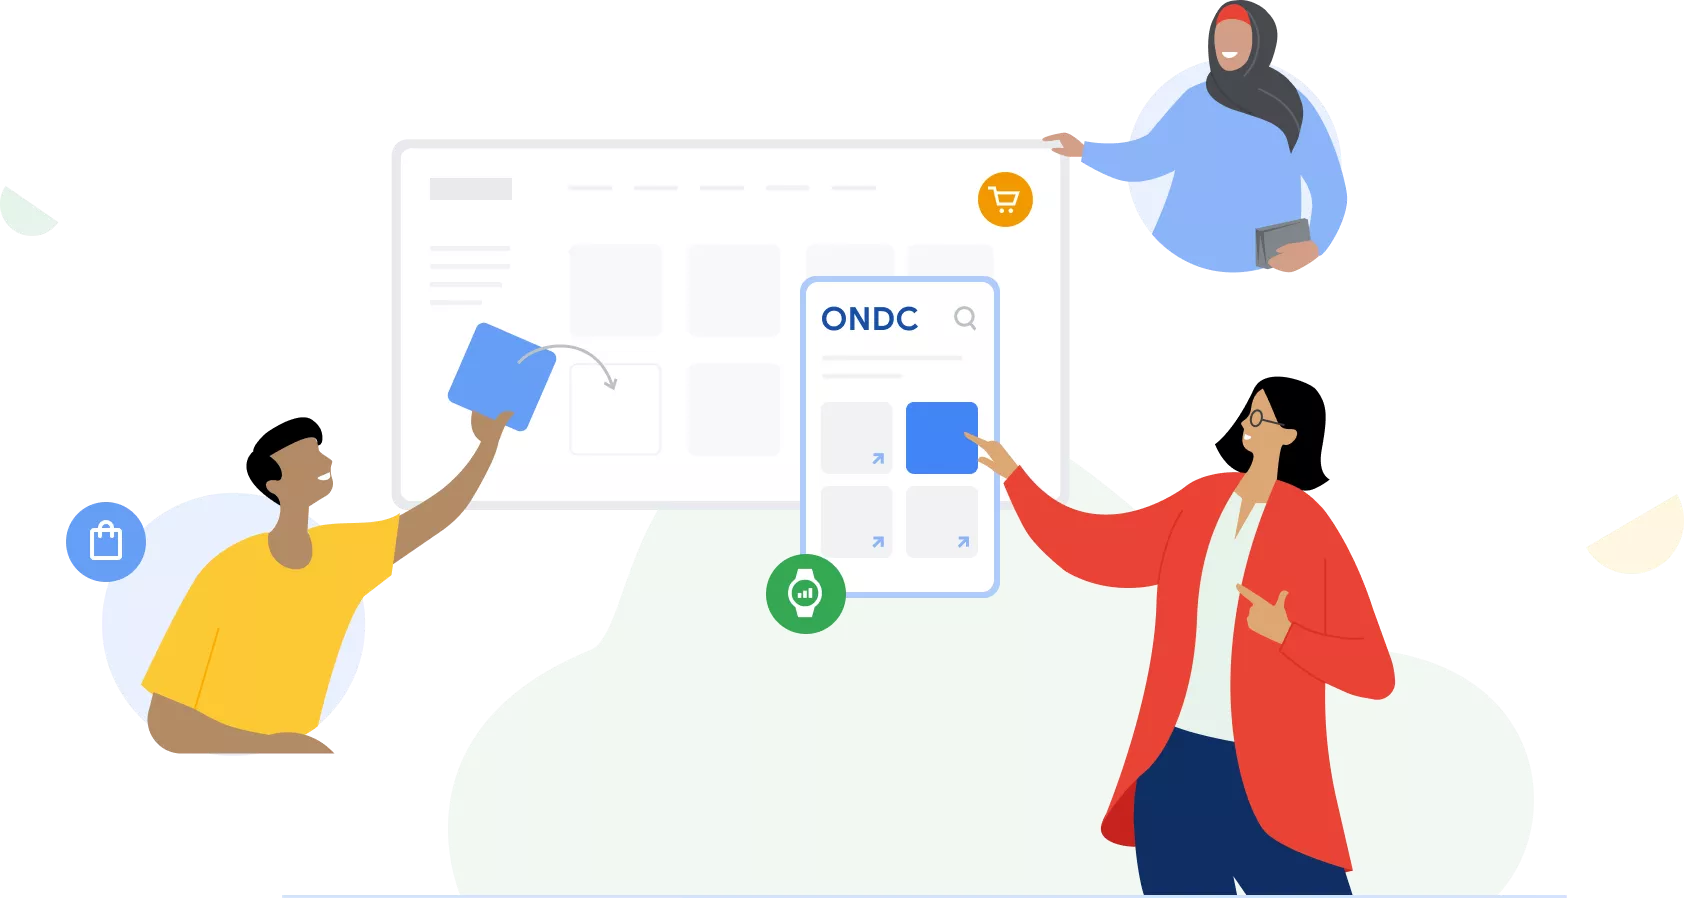 A person using ONDC to purchase things online